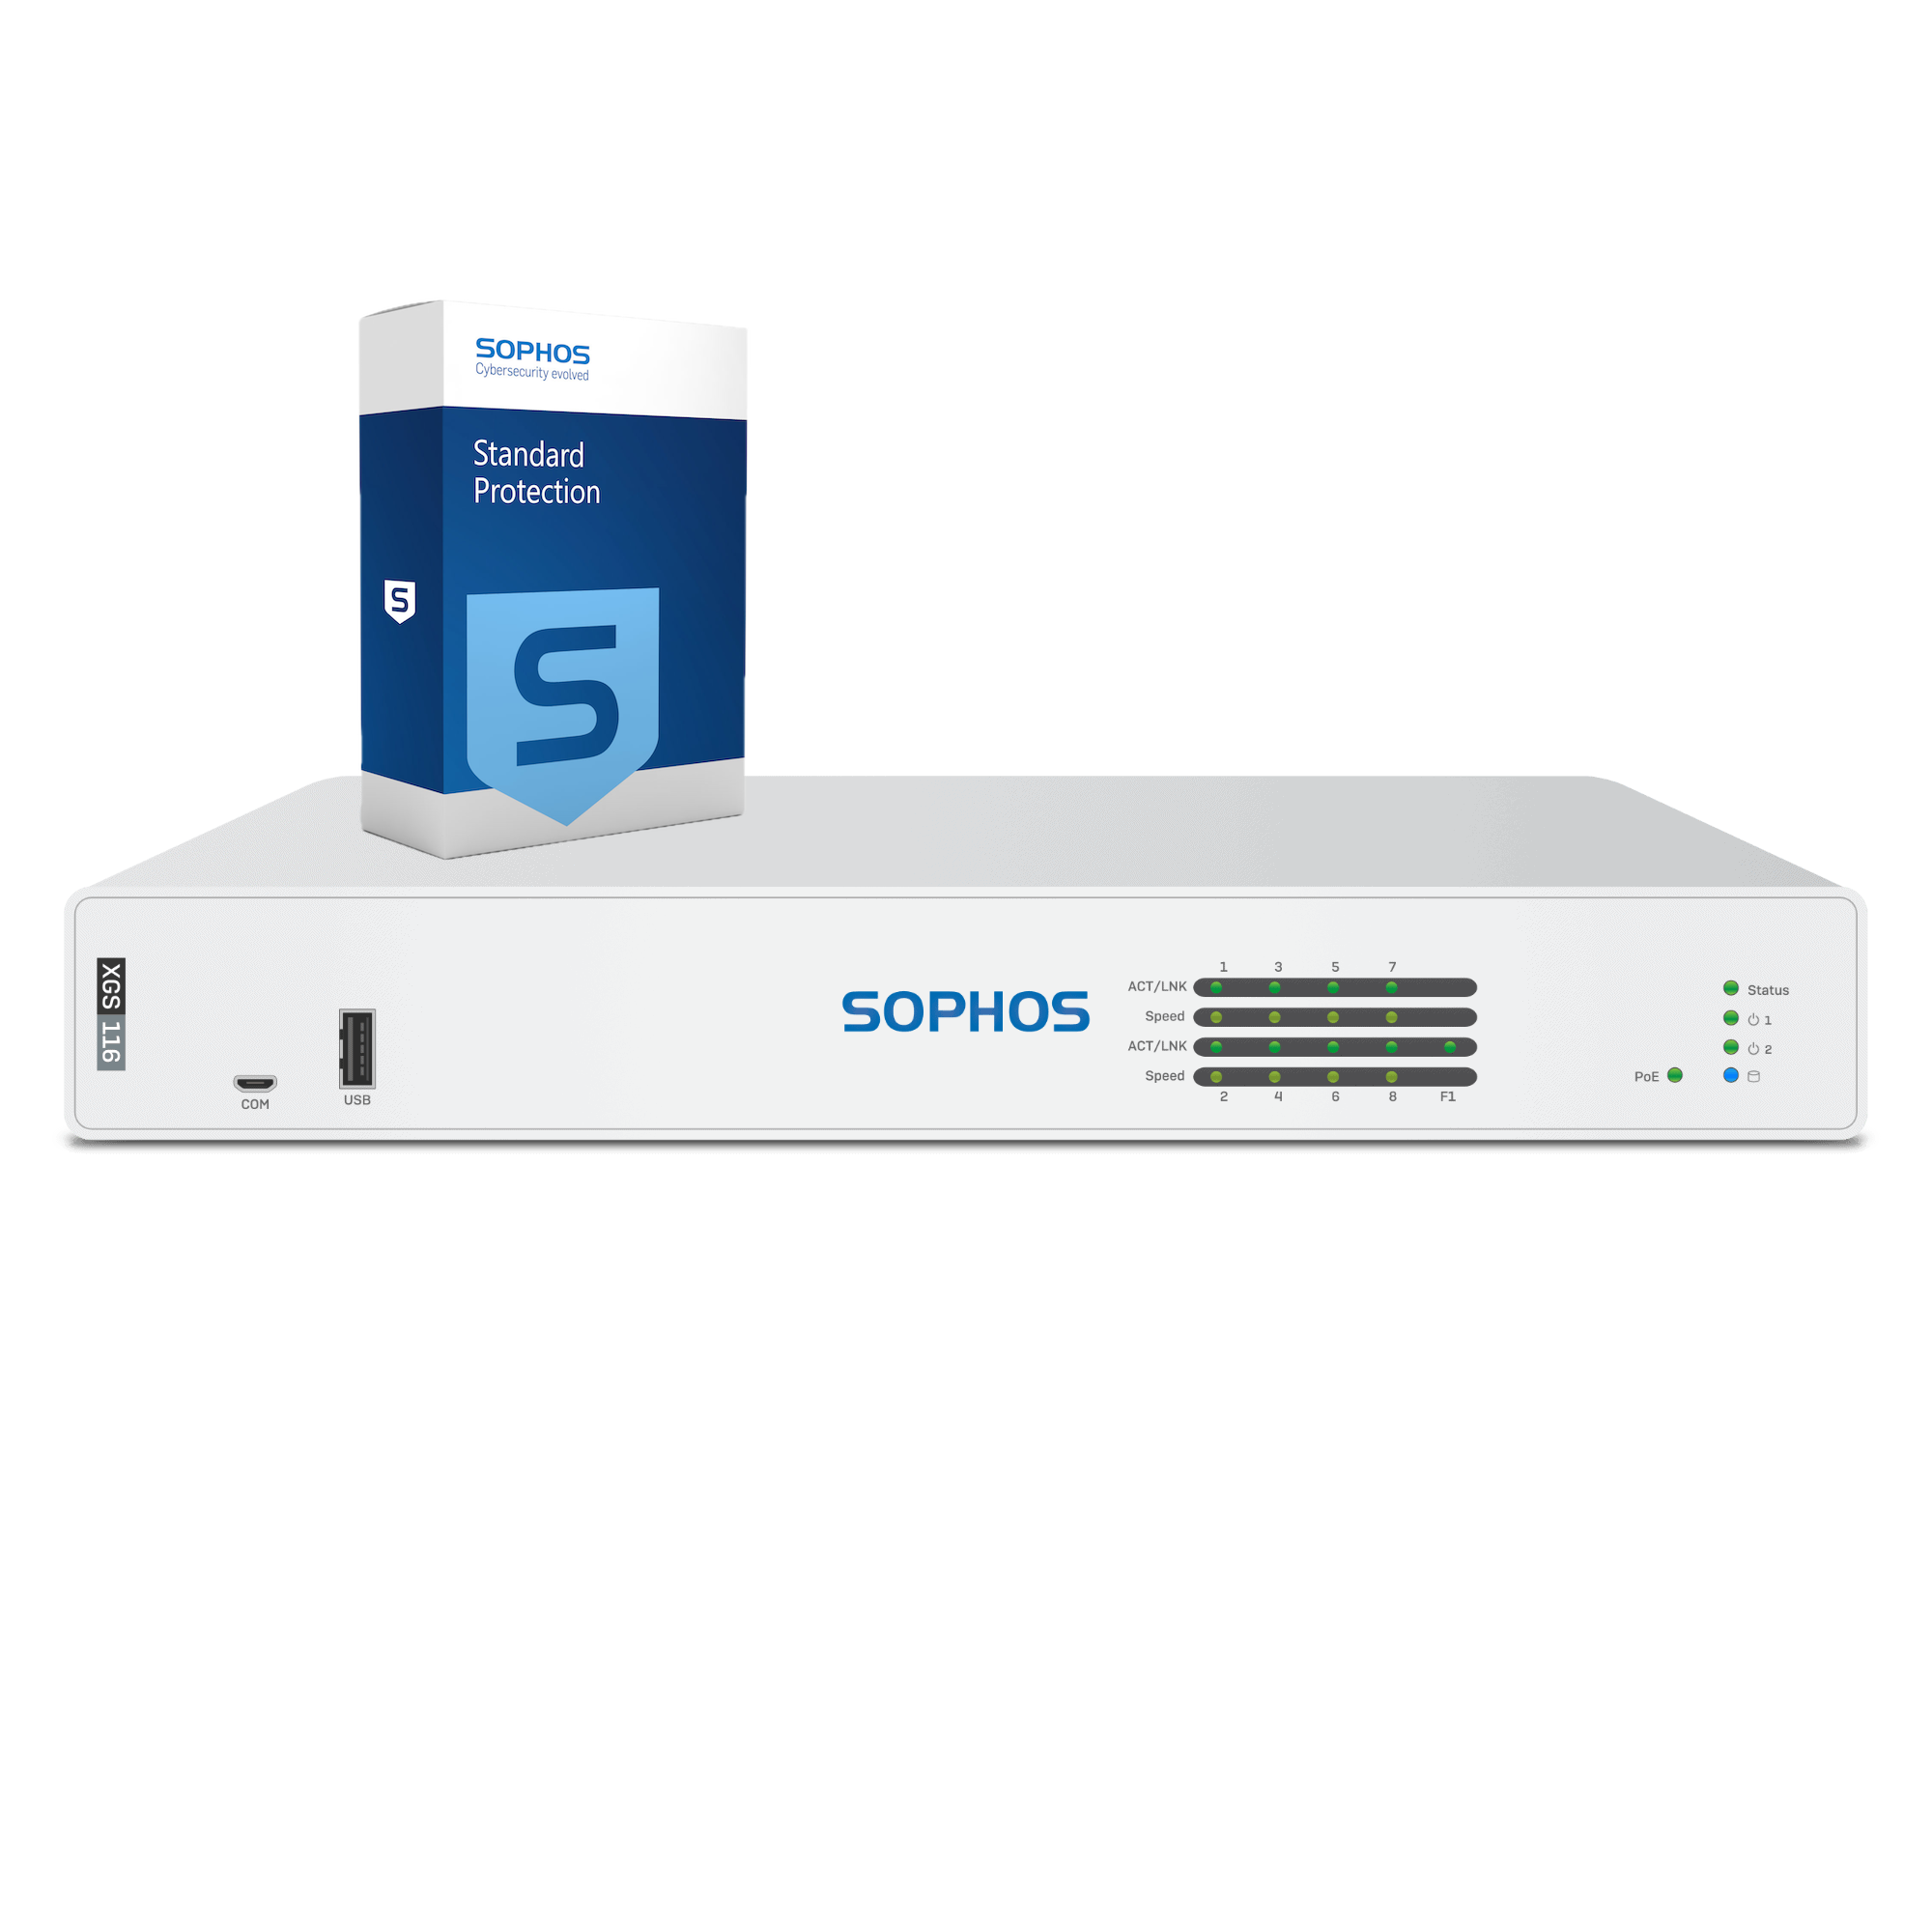 Sophos XGS 116 Firewall with Standard Protection, 3-year - EU power cord